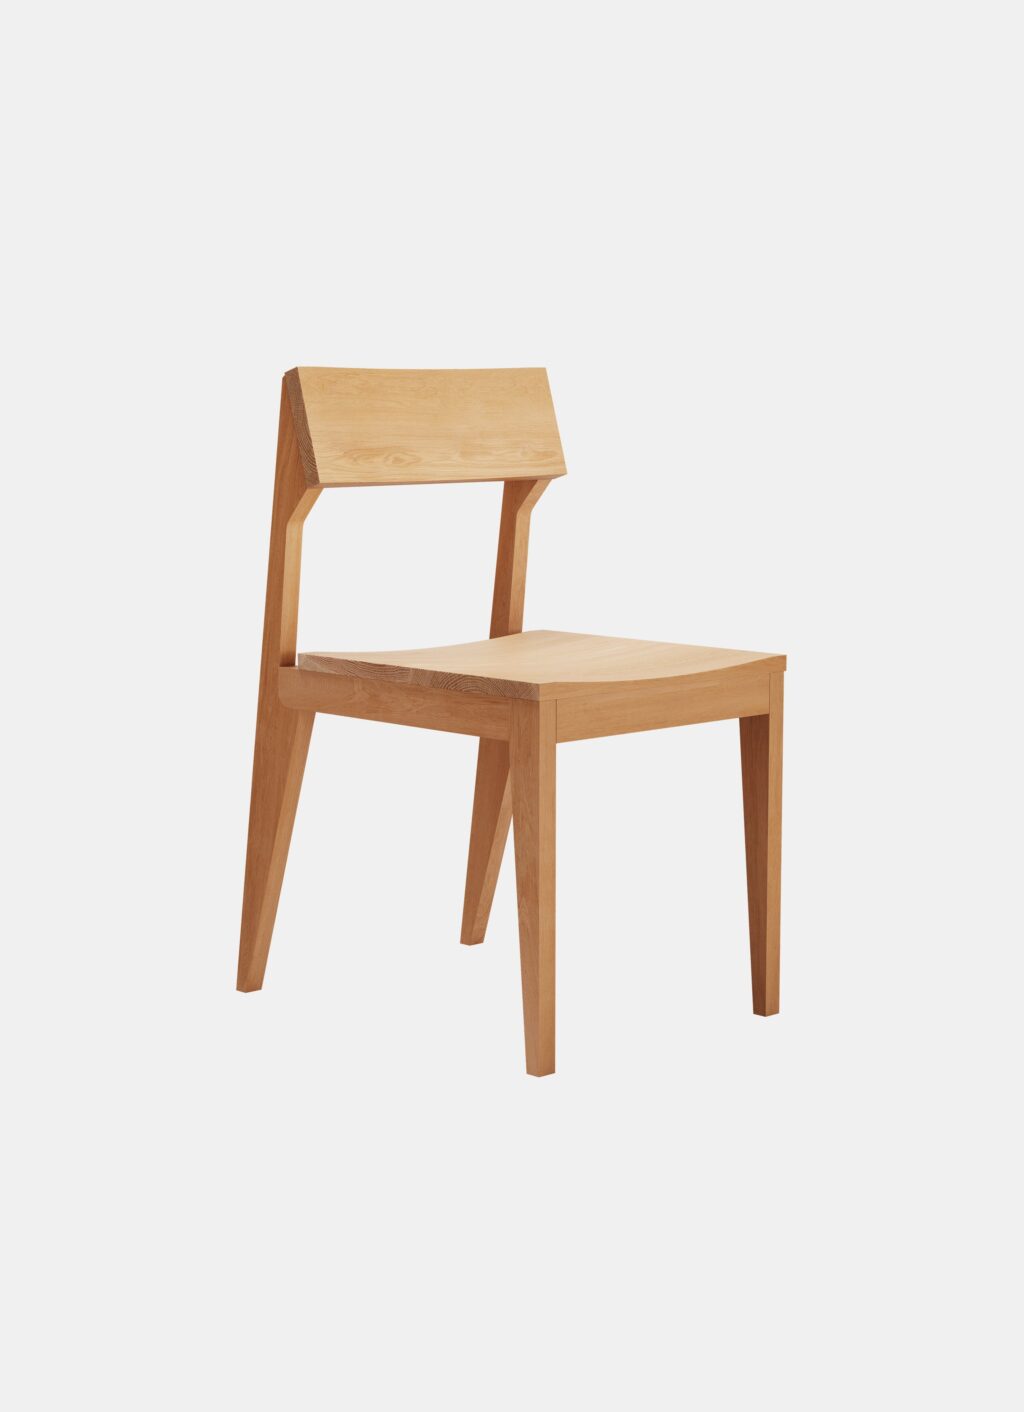 Objekte unserer Tage - OUT - Schulz - Chair - various woods